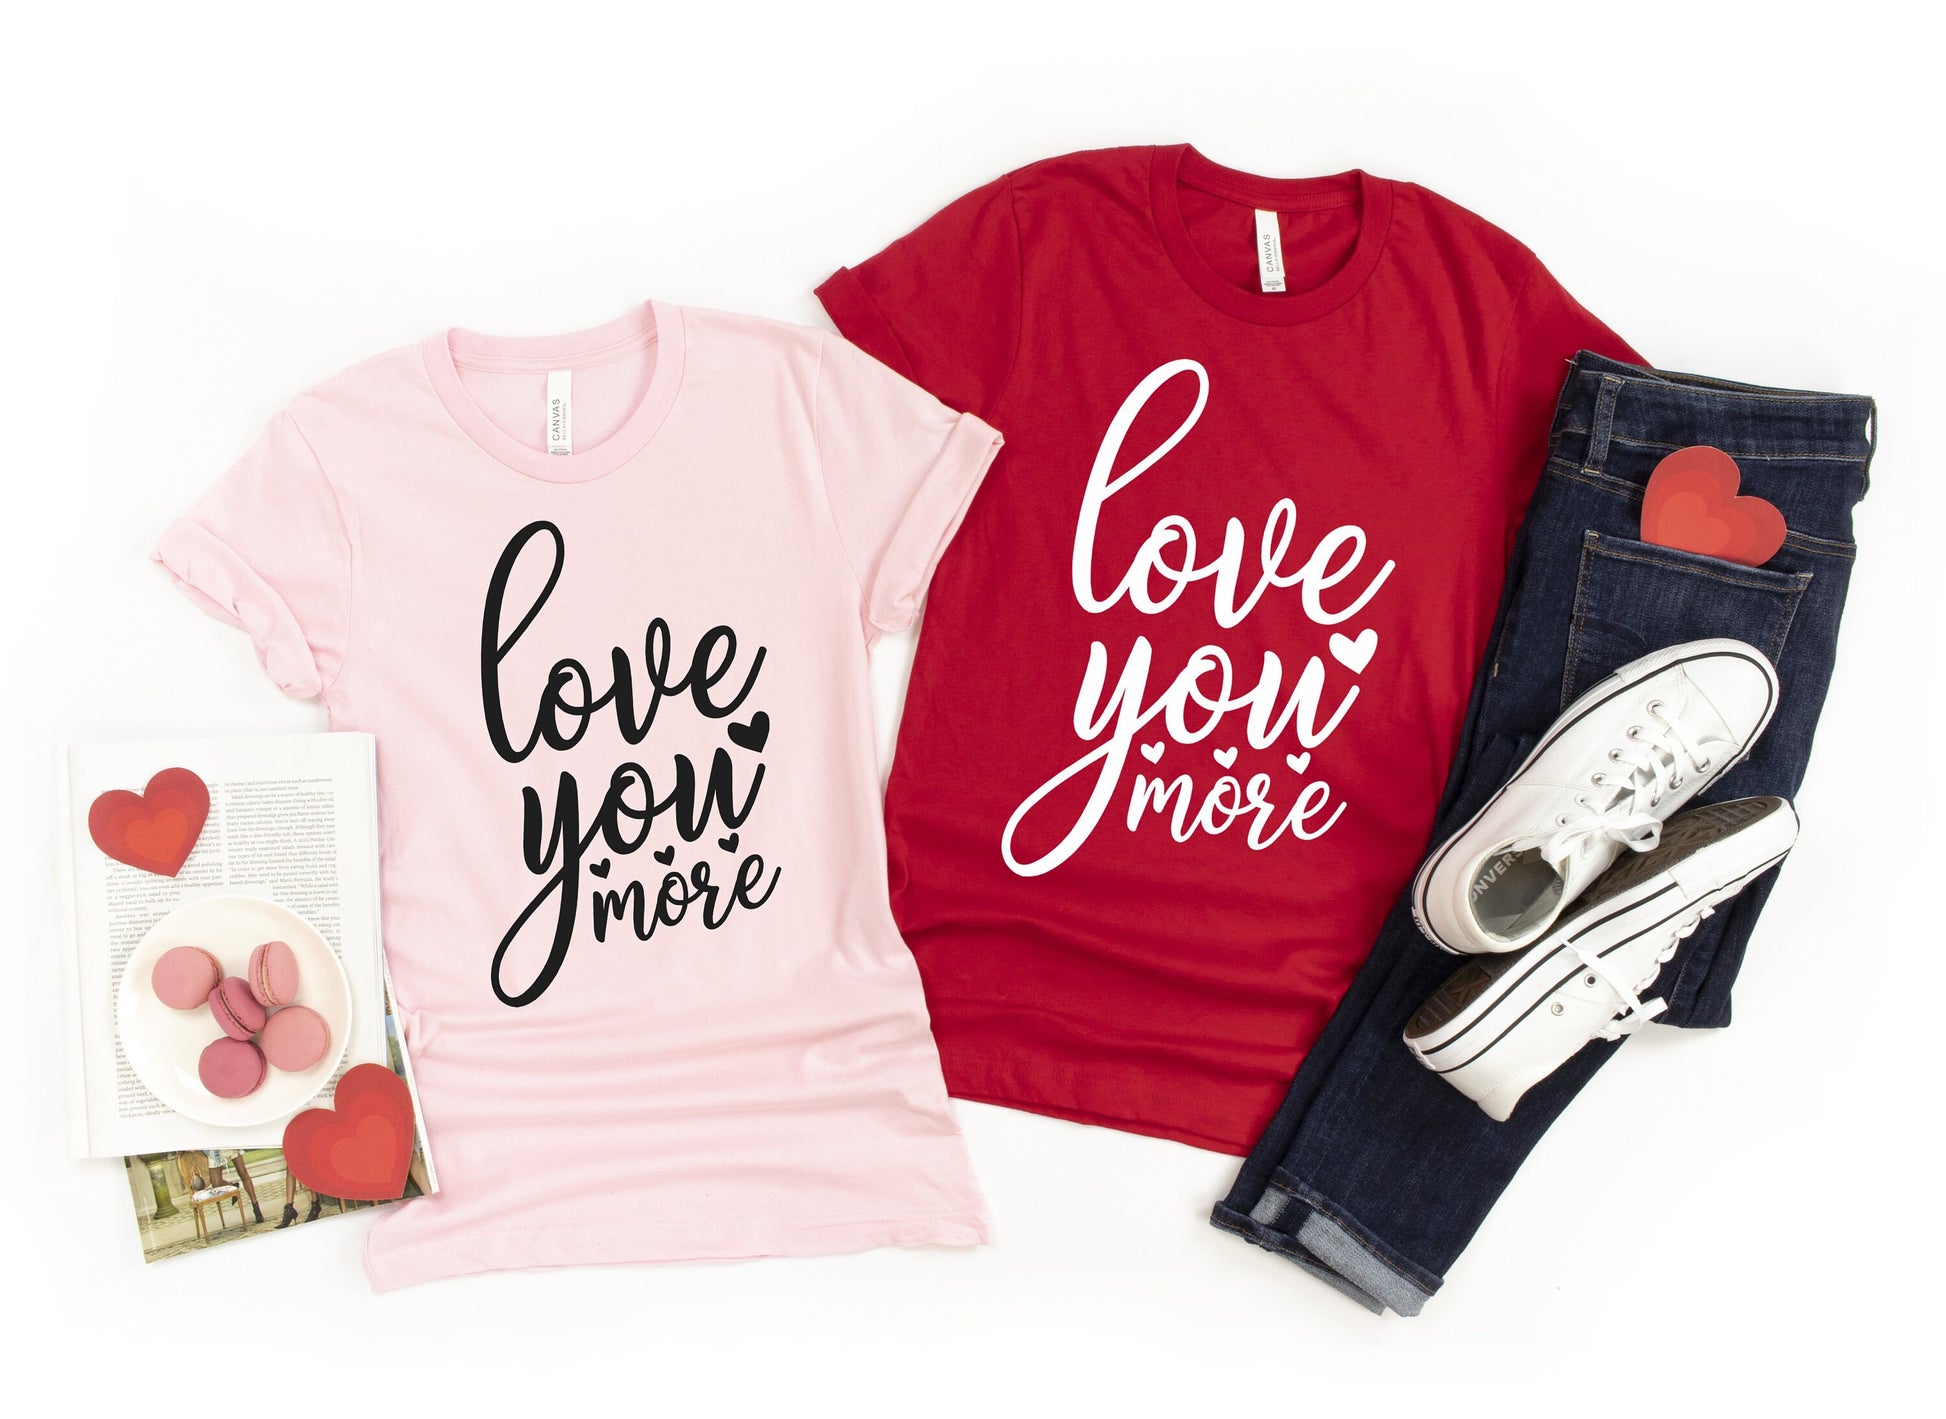 Love You More Valentine's Day Couples t-shirt - Matching Valentine's shirts -Matching Couples Shirts - Honeymoon Matching Shirts